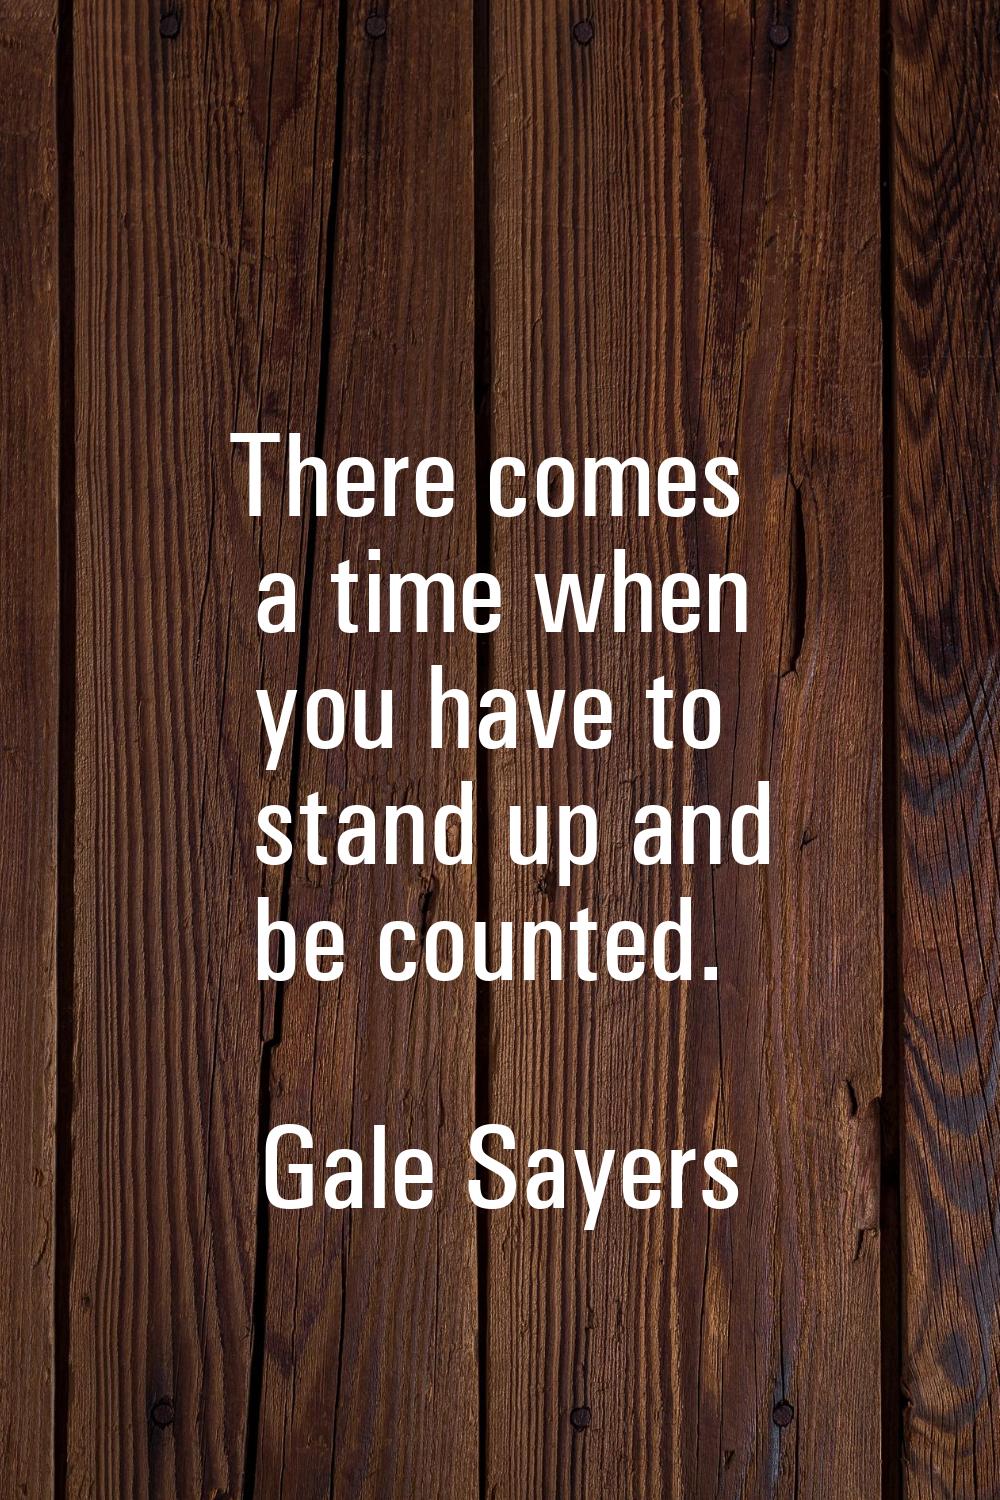 There comes a time when you have to stand up and be counted.